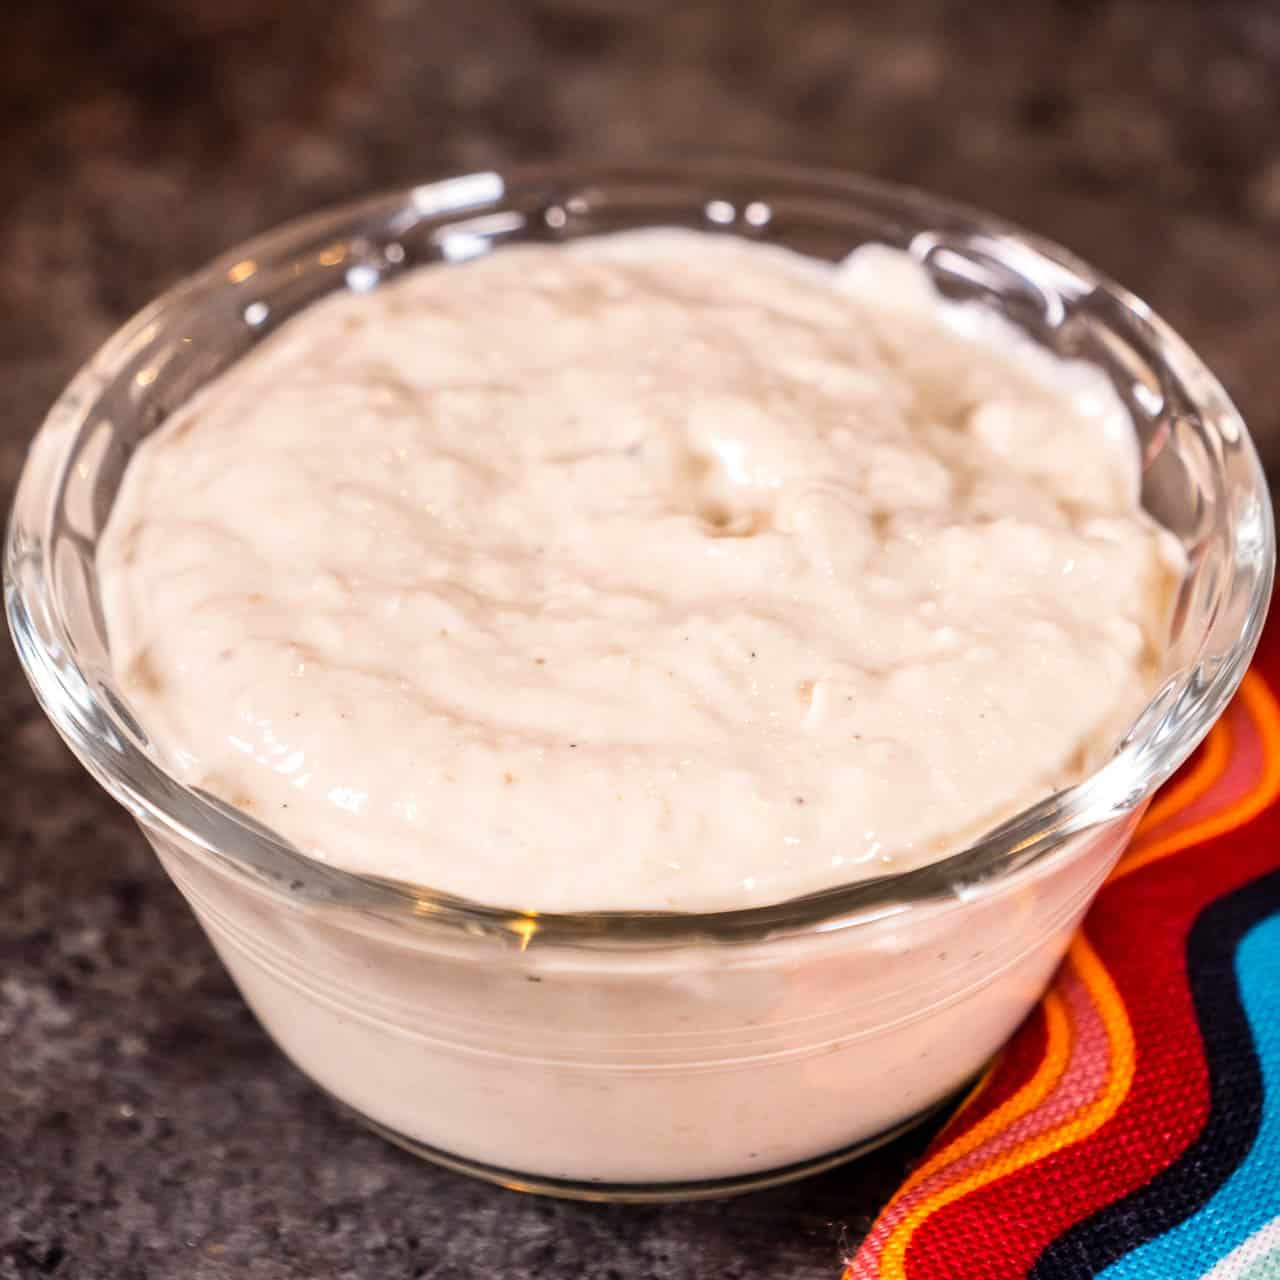 A small bowl of horseradish sauce with a colorful napkin